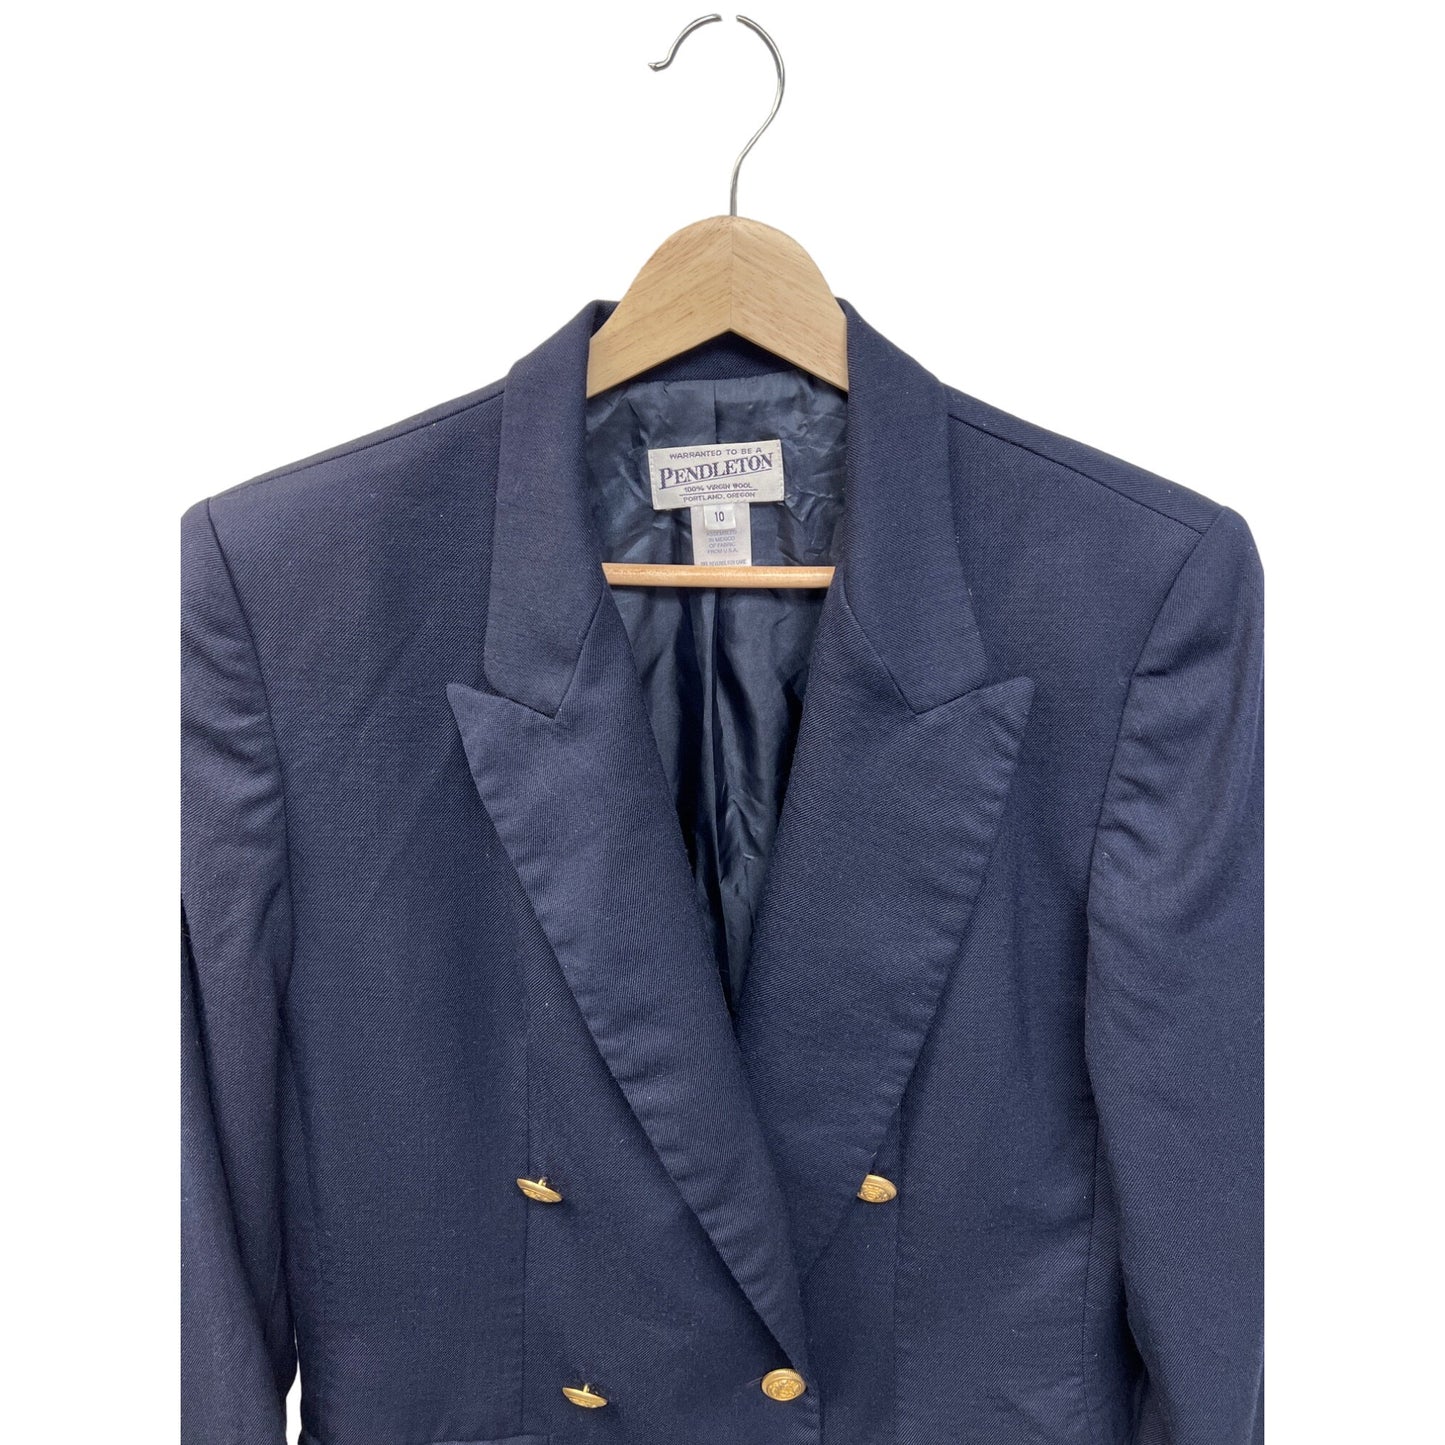 Pendleton Vintage Blue Wool Double-Breasted Blazer with Gold Buttons